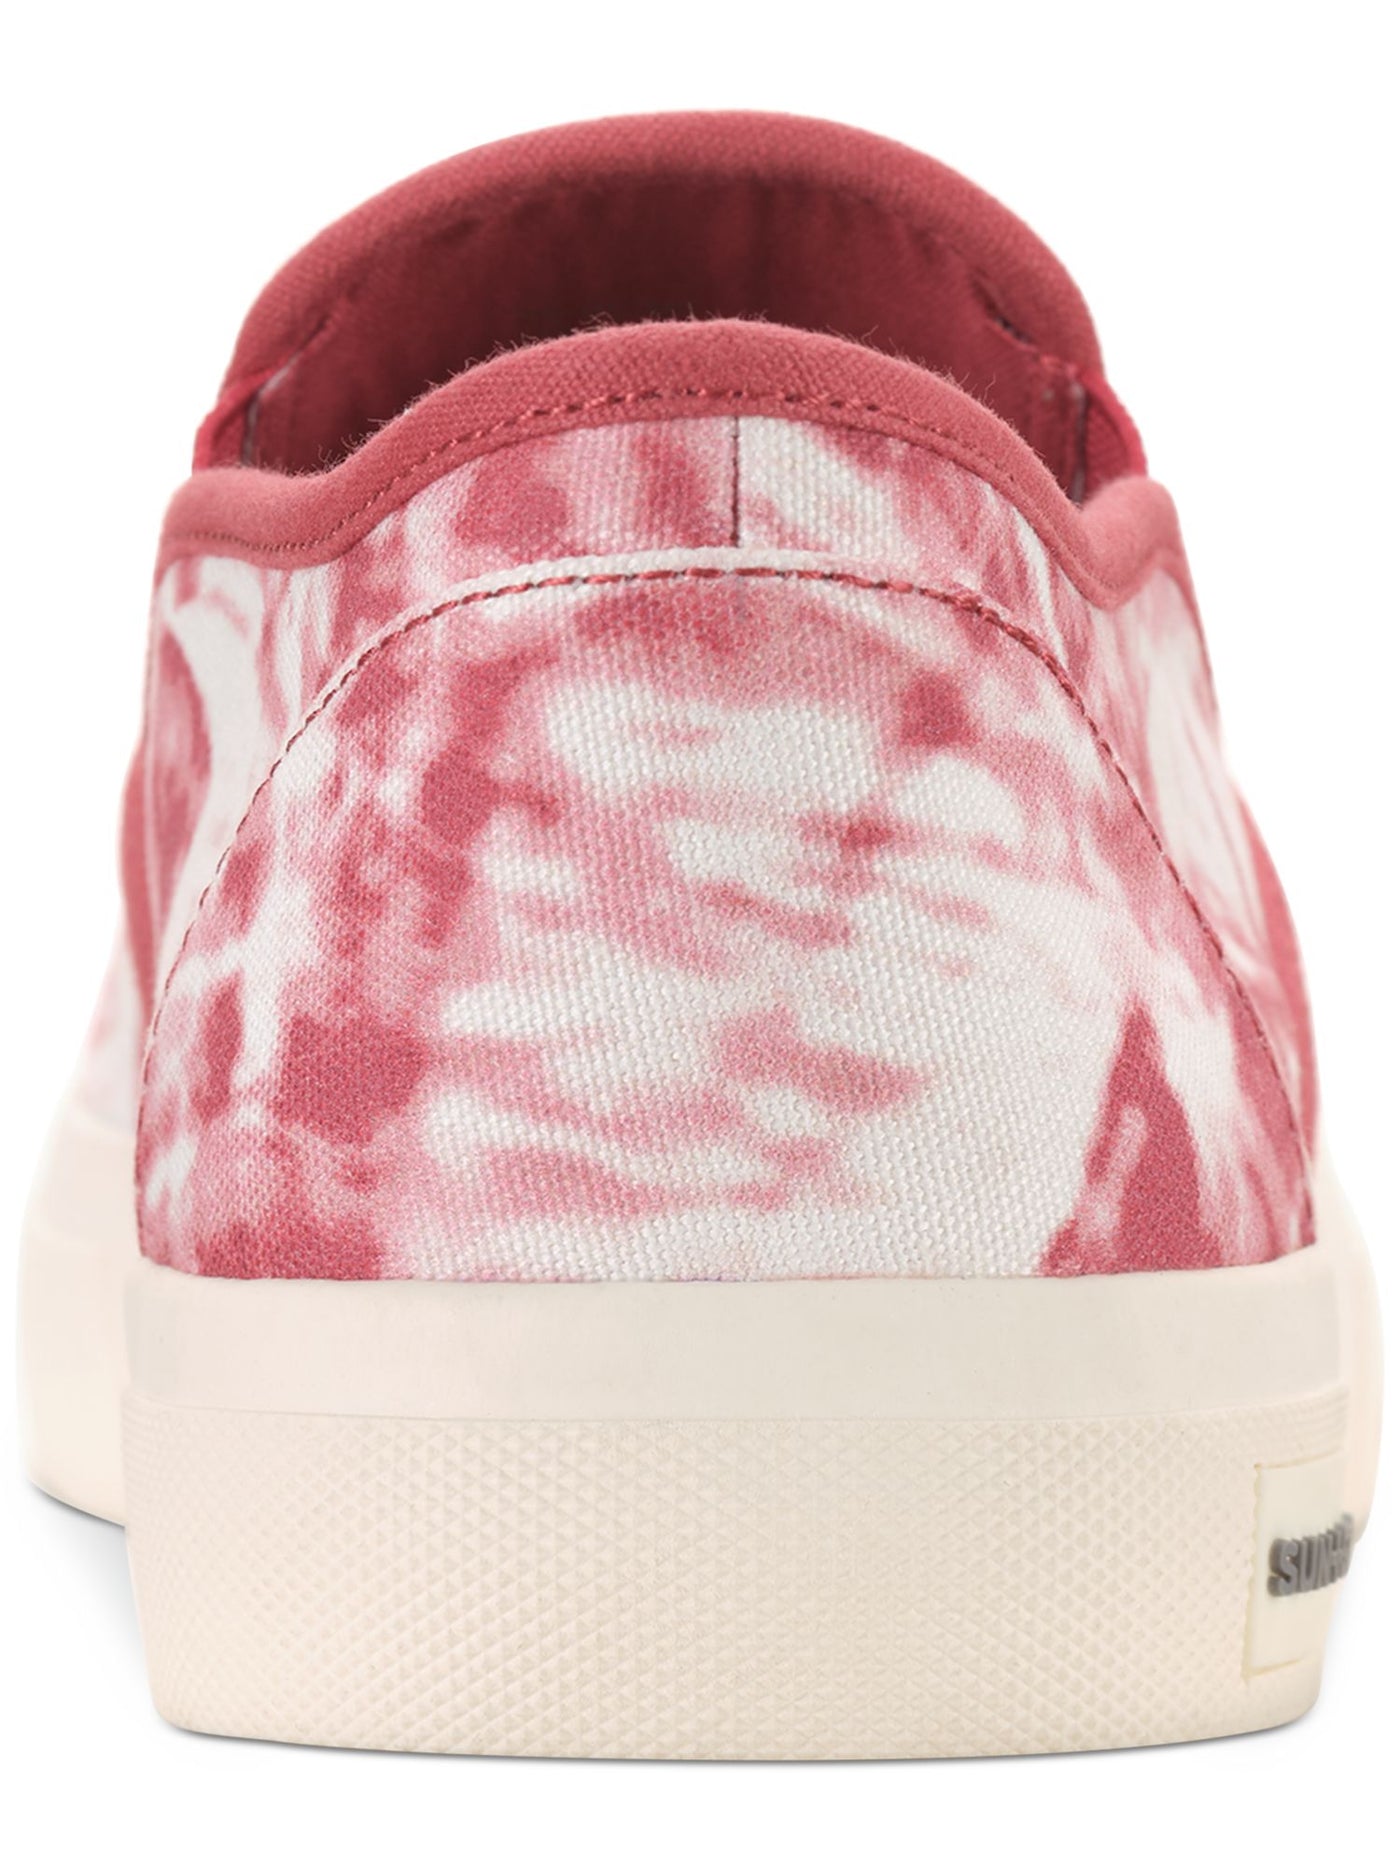 MADDEN Womens Red Tie Dye Padded Goring Reins Round Toe Platform Slip On Sneakers Shoes 10.5 M